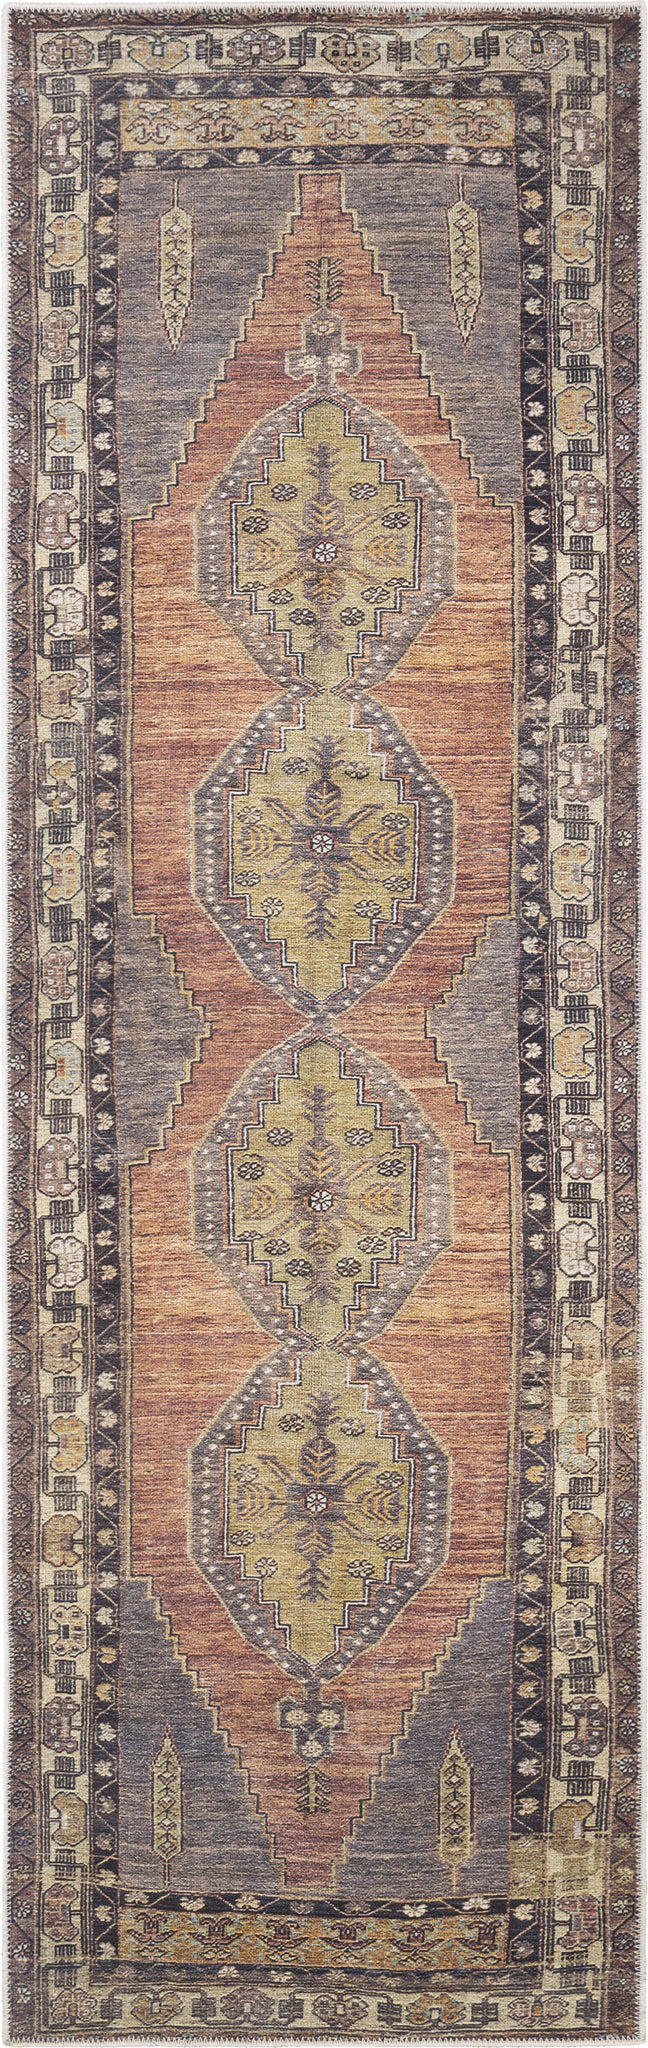 Surya Antiquity AUY-2302 Area Rug by Artistic Weavers